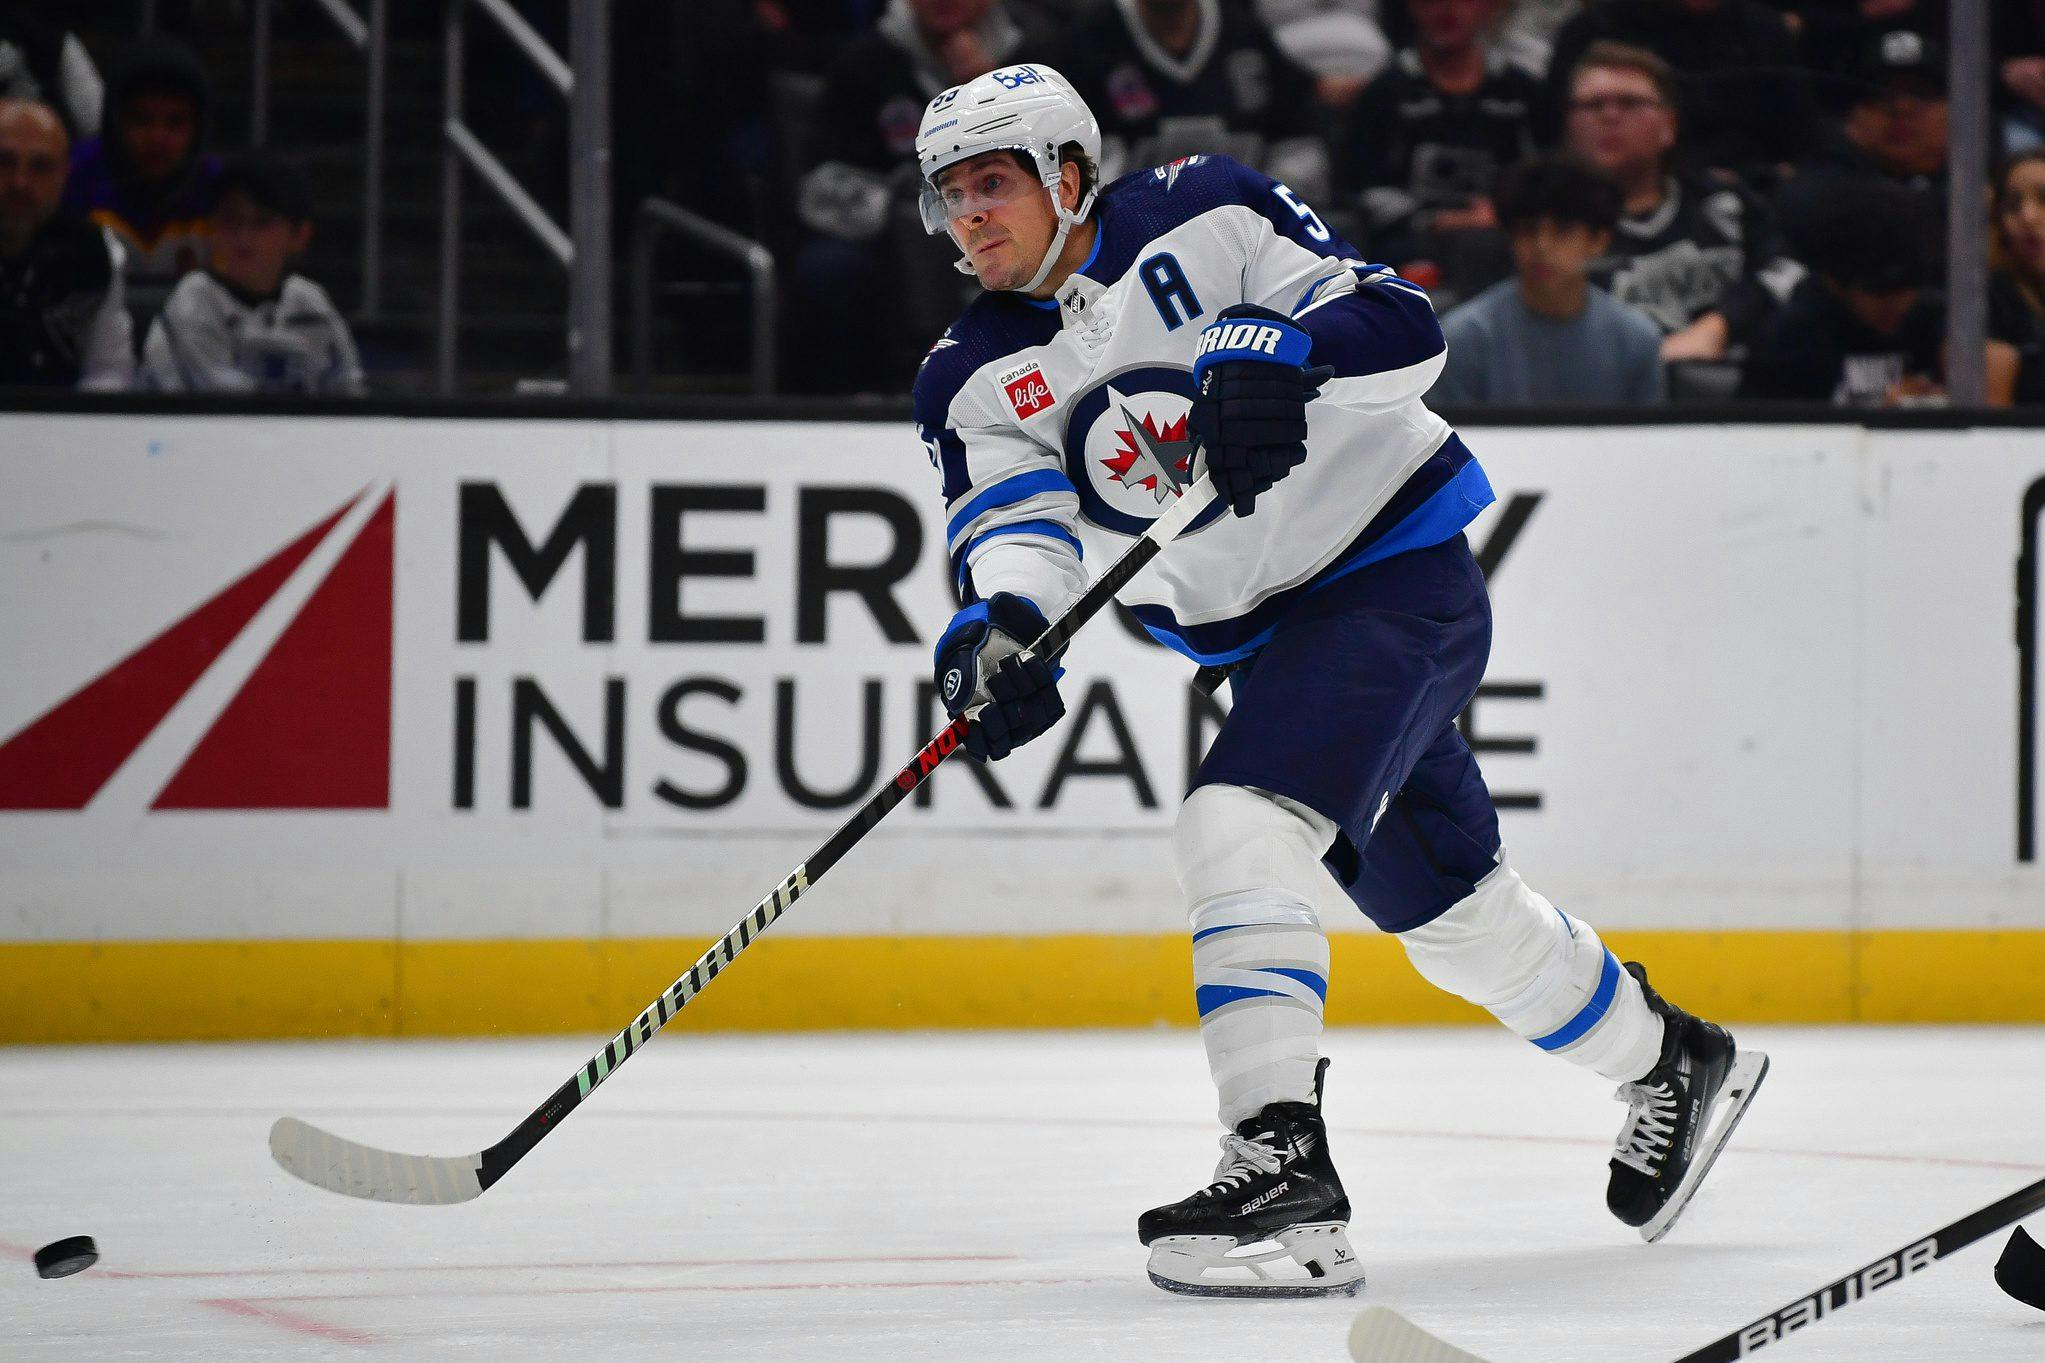 Jets activate Mark Scheifele off IR, place Axel Jonsson-Fjallby on waivers